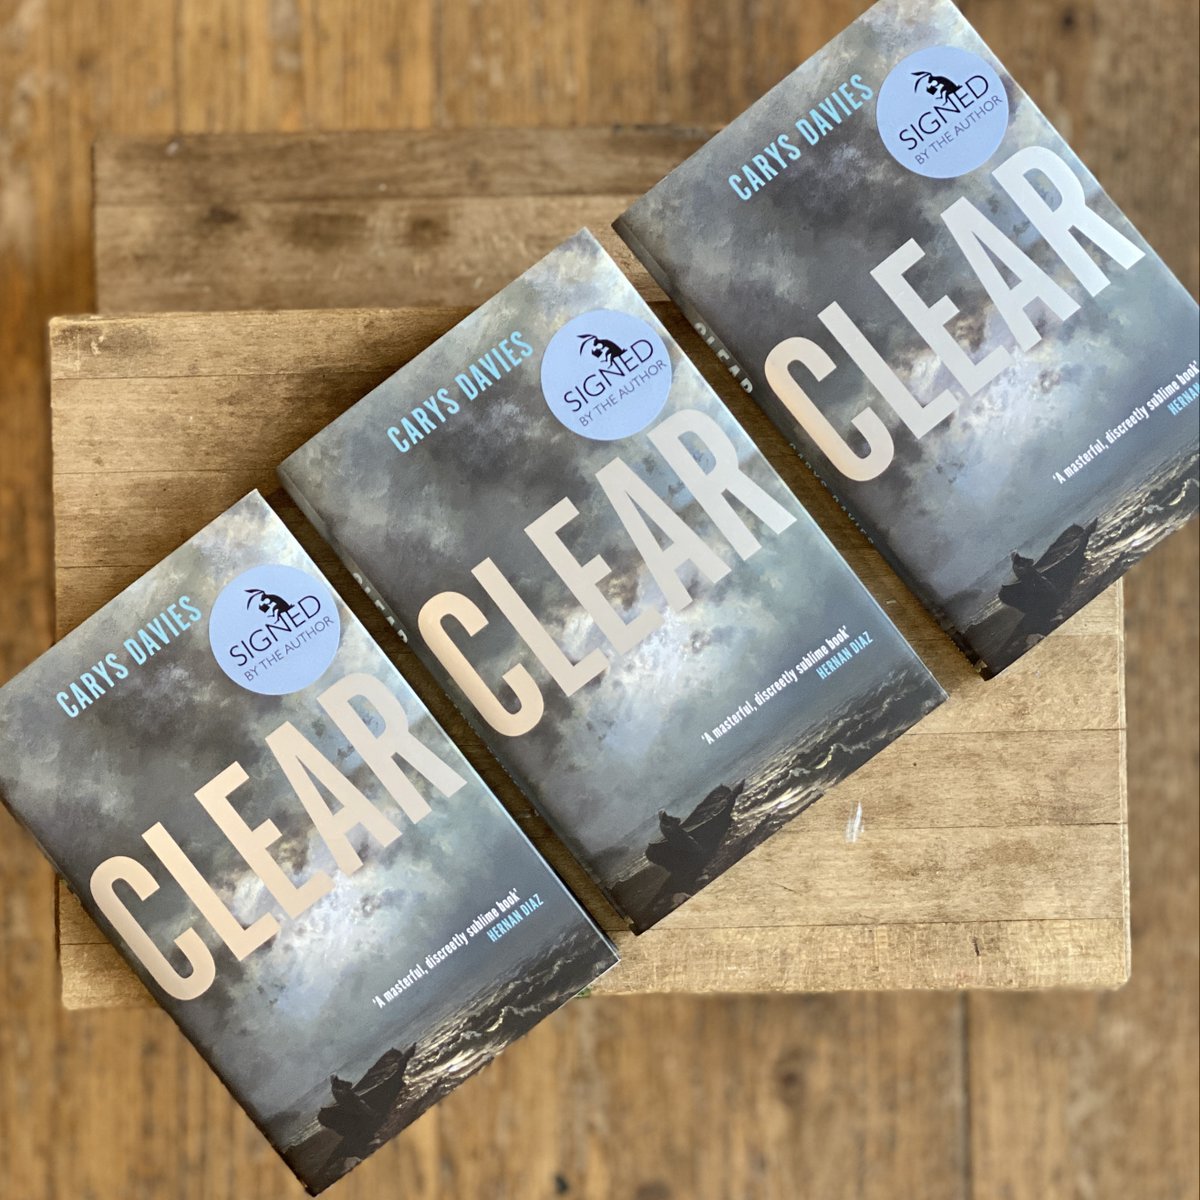 Happy publication day to #CarysDavies and her new novel #Clear. We are very excited to be hosting Carys for an event on Wed 20th March, book tickets here: ticketsource.co.uk/mainstreettrad…